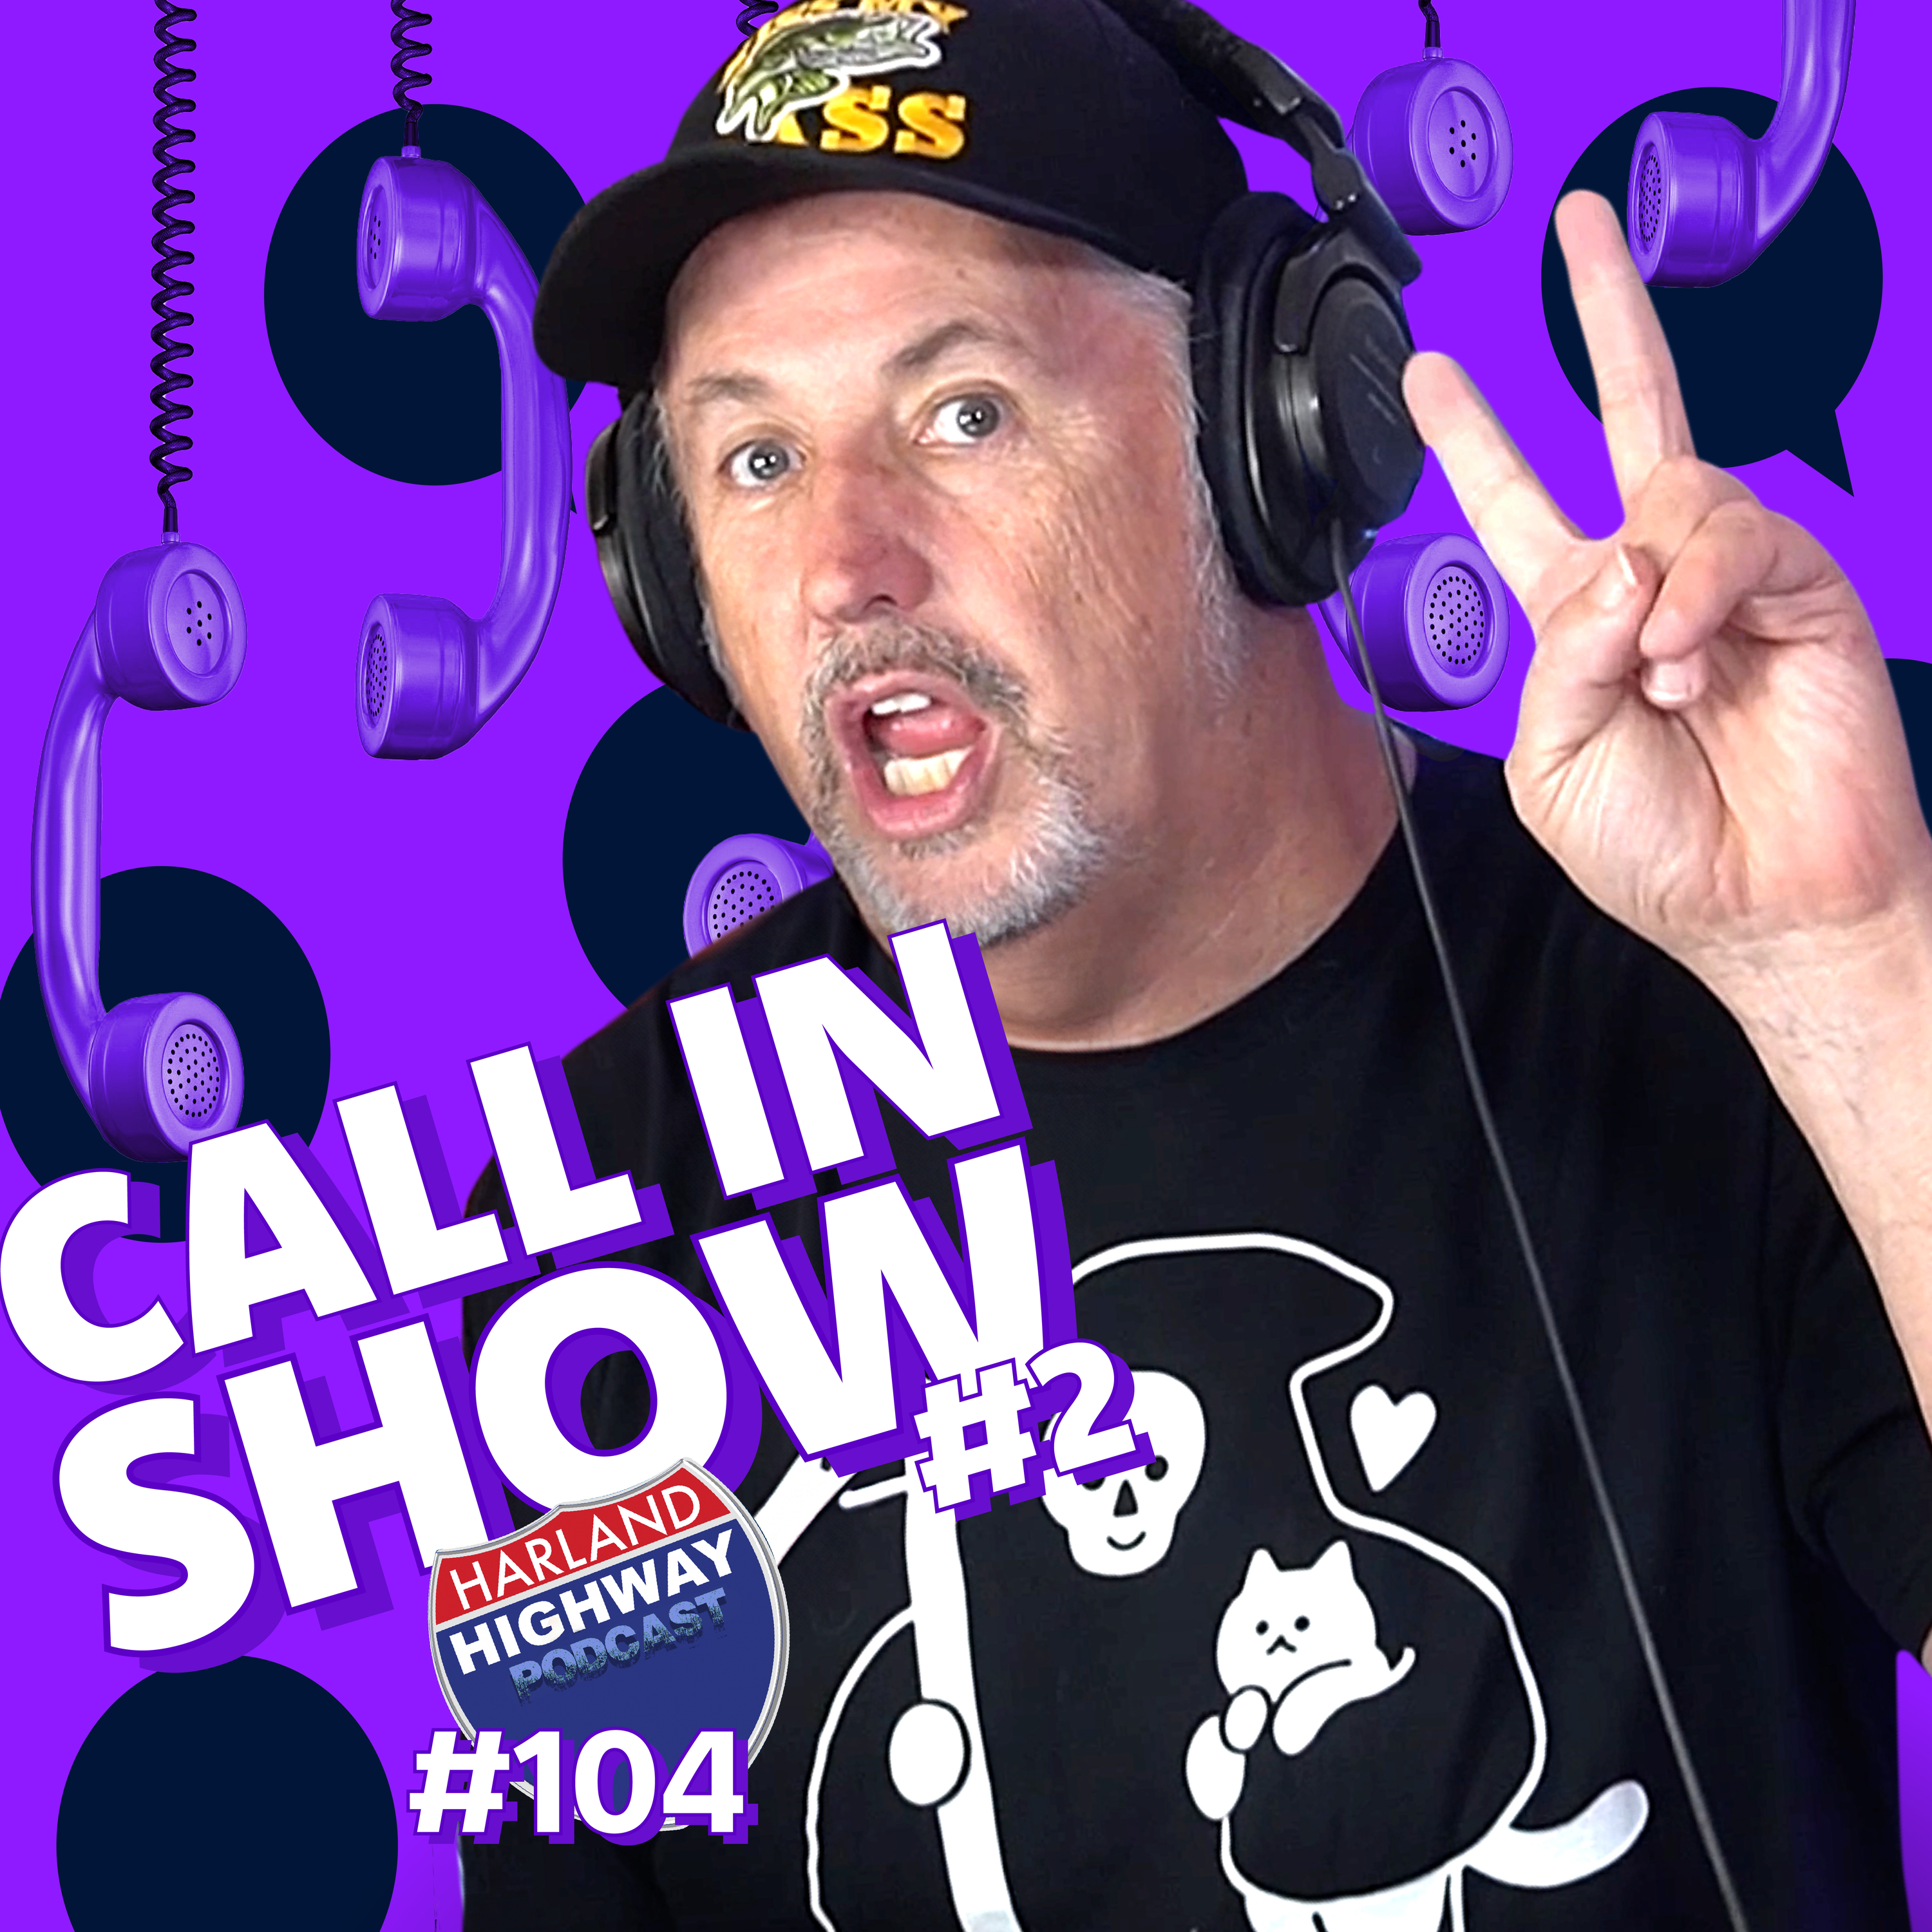 The 2nd CALL IN show! Harland answers your burning questions! #104